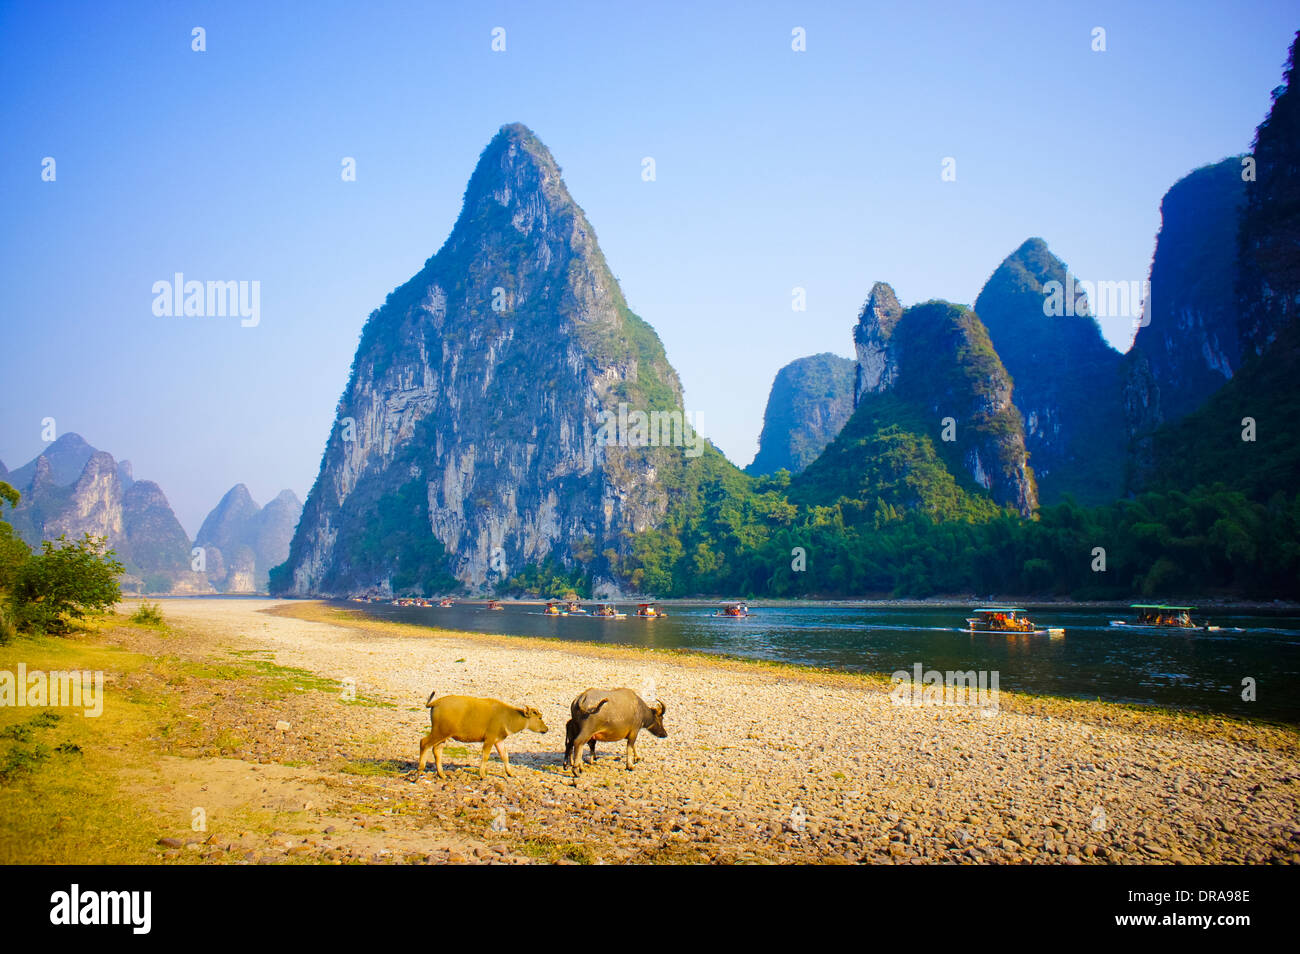 Yangshuo, Guilin, Chine Banque D'Images